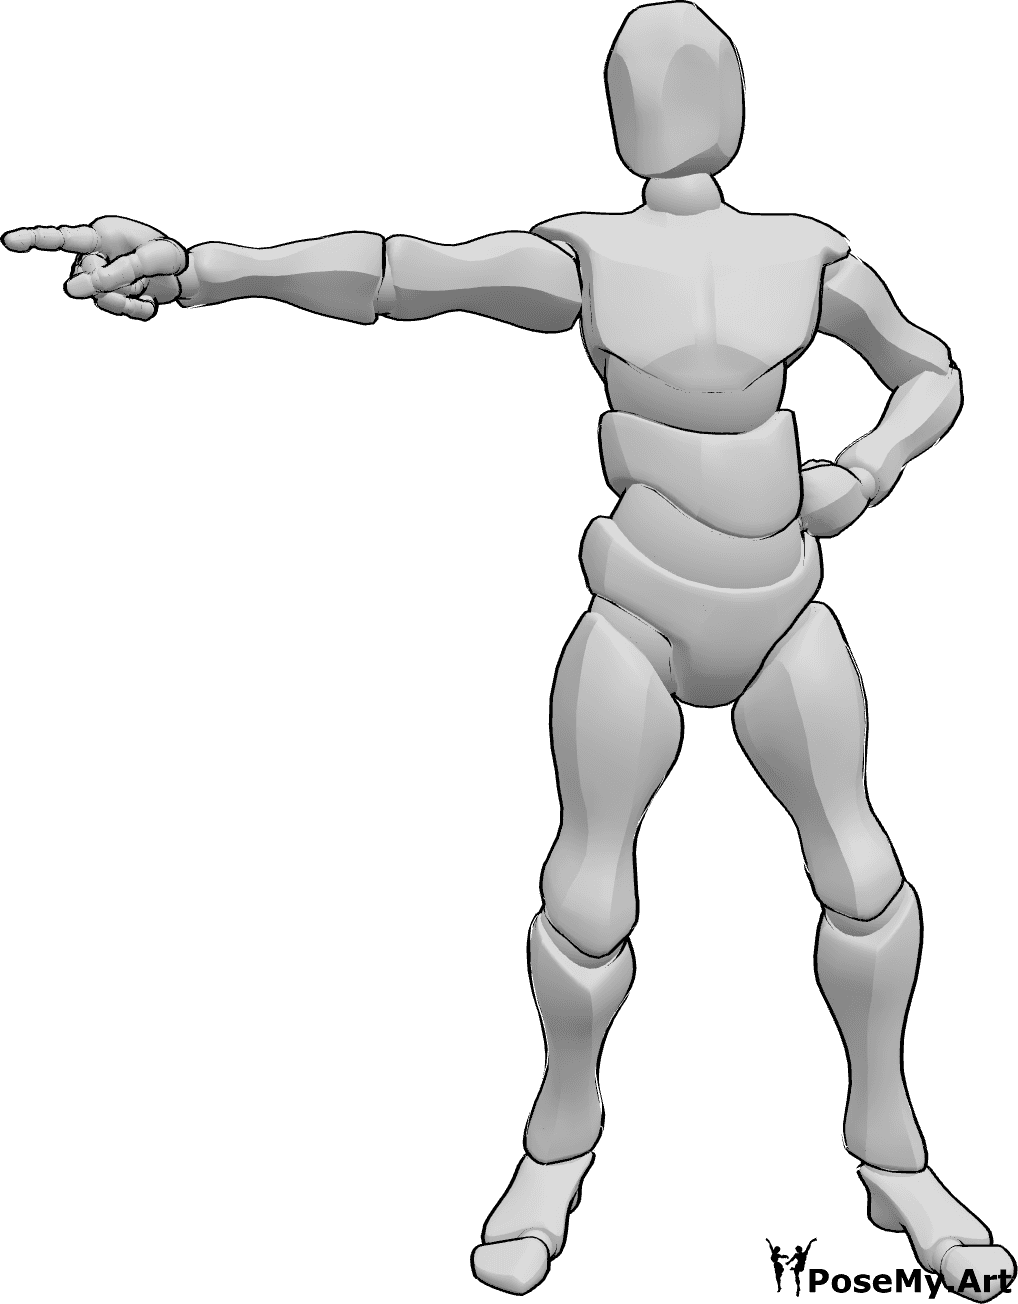 Pose Reference- Male standing pointing pose - Male is stnding with his left hand on hip and pointing with right hand